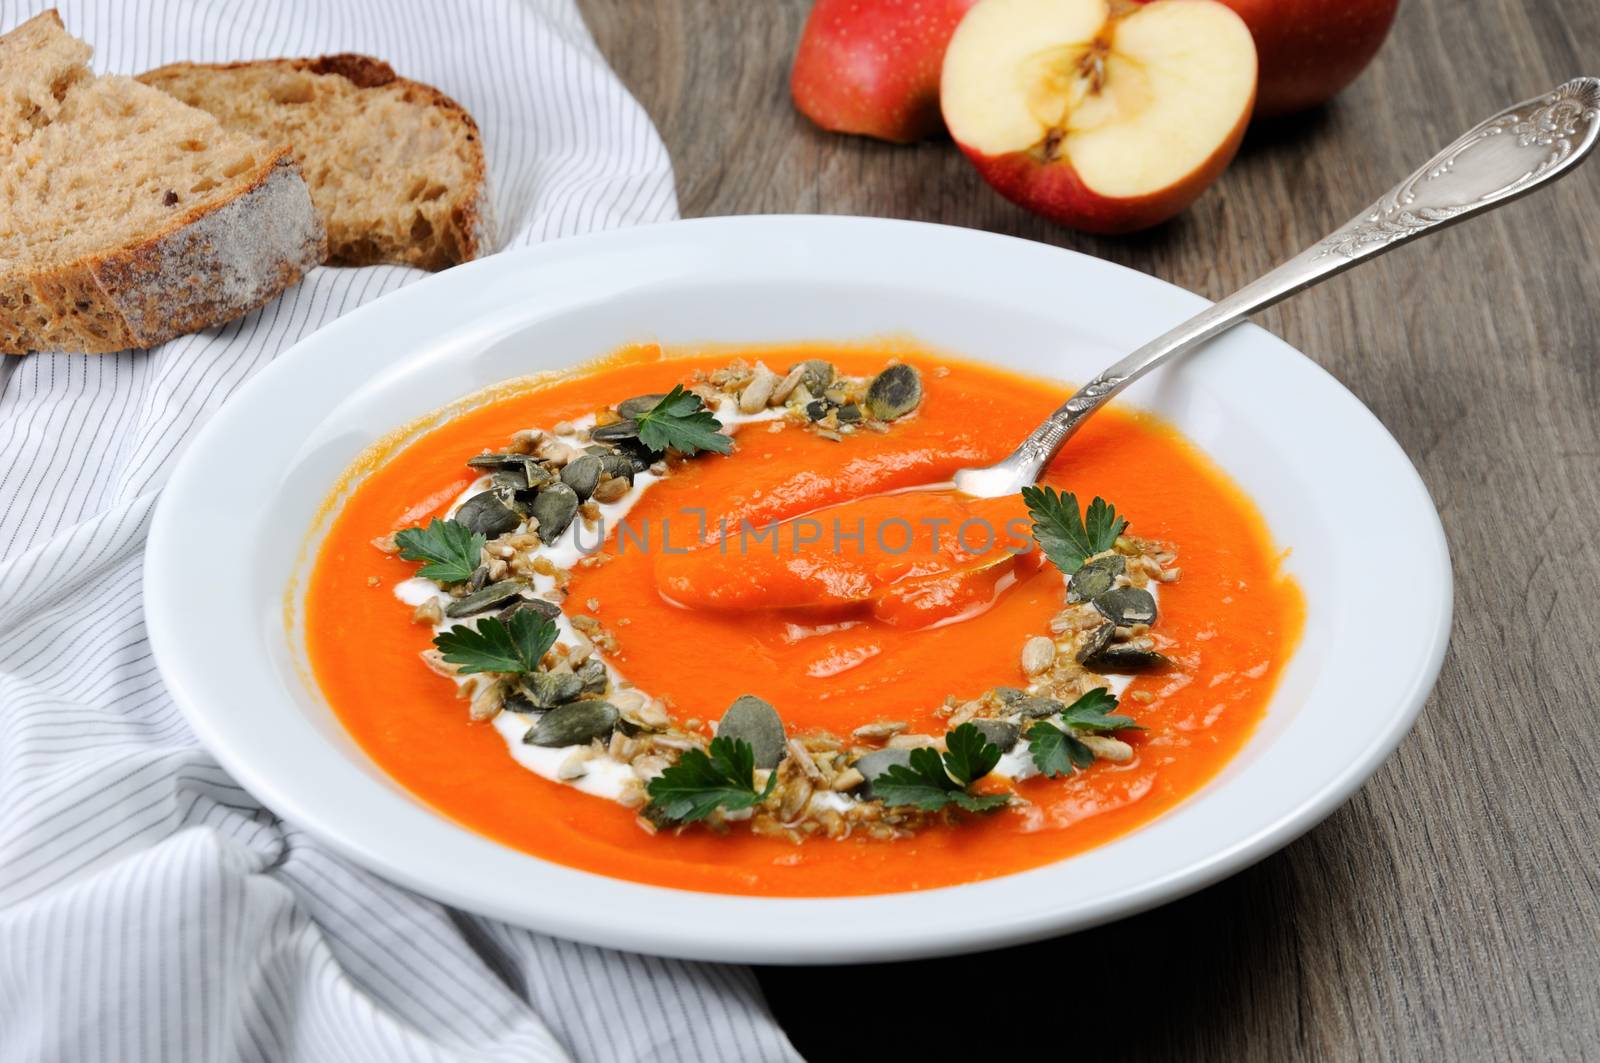  A wipe of pumpkin-apple soup with a tender, soft consistence,  yoghurt  and seasoned with pumpkin seeds and sunflower seeds. This is what you need for those who watch their health.